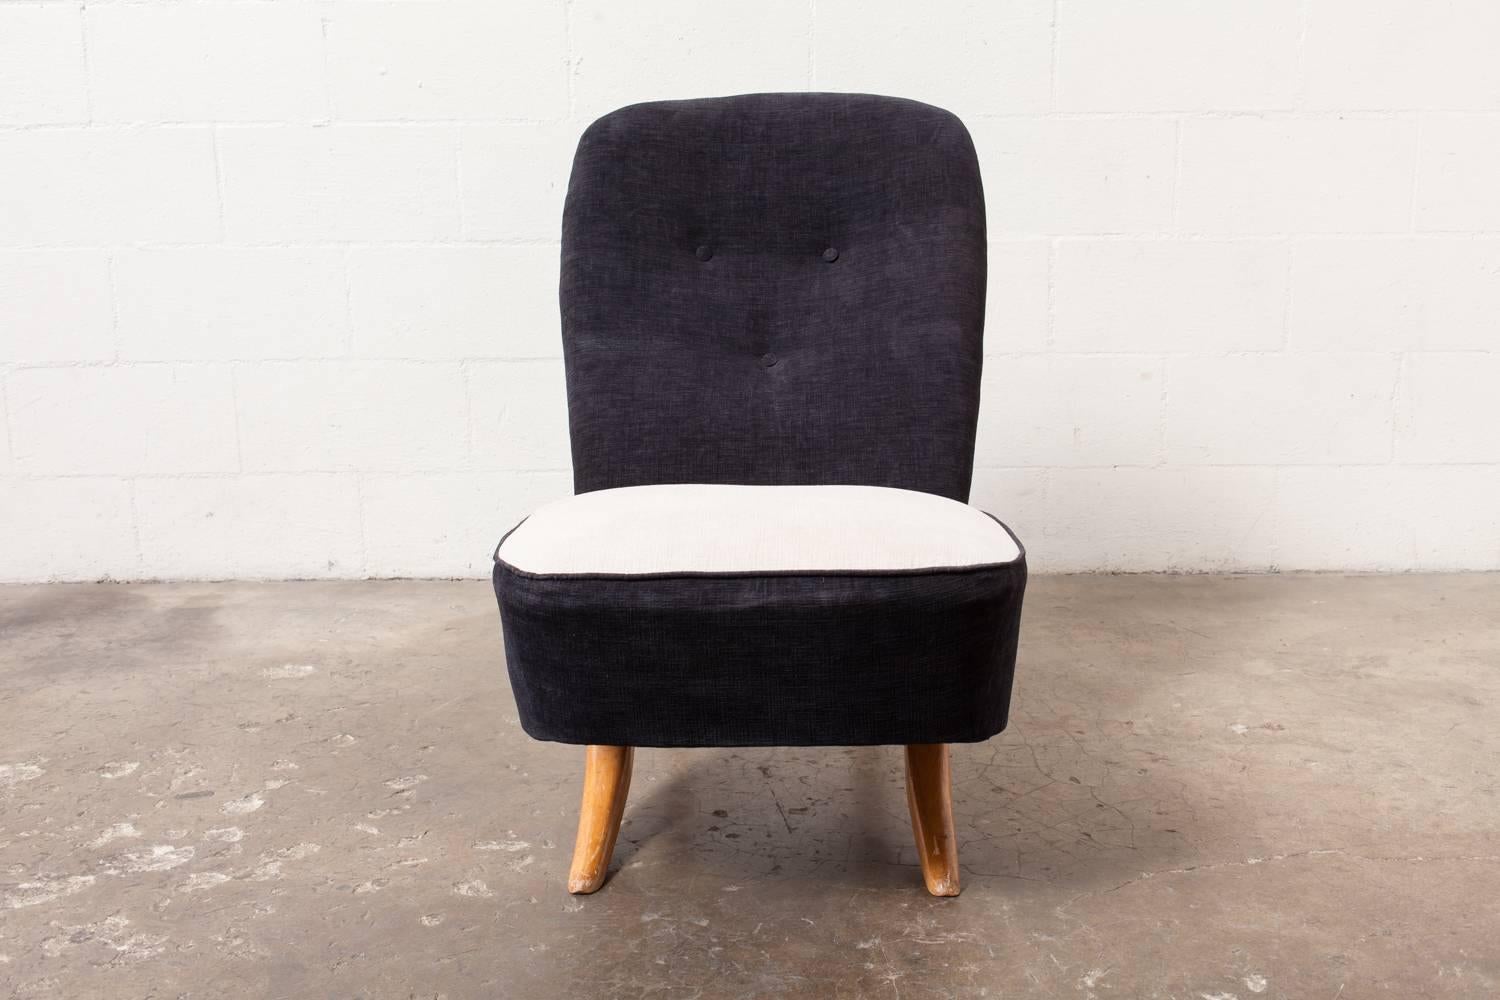 Unique tension set construction. The back and seat are two separate pieces that fit together like two pieces of a puzzle. Upholstery in black with white seat top. Original finished beechwood frame.